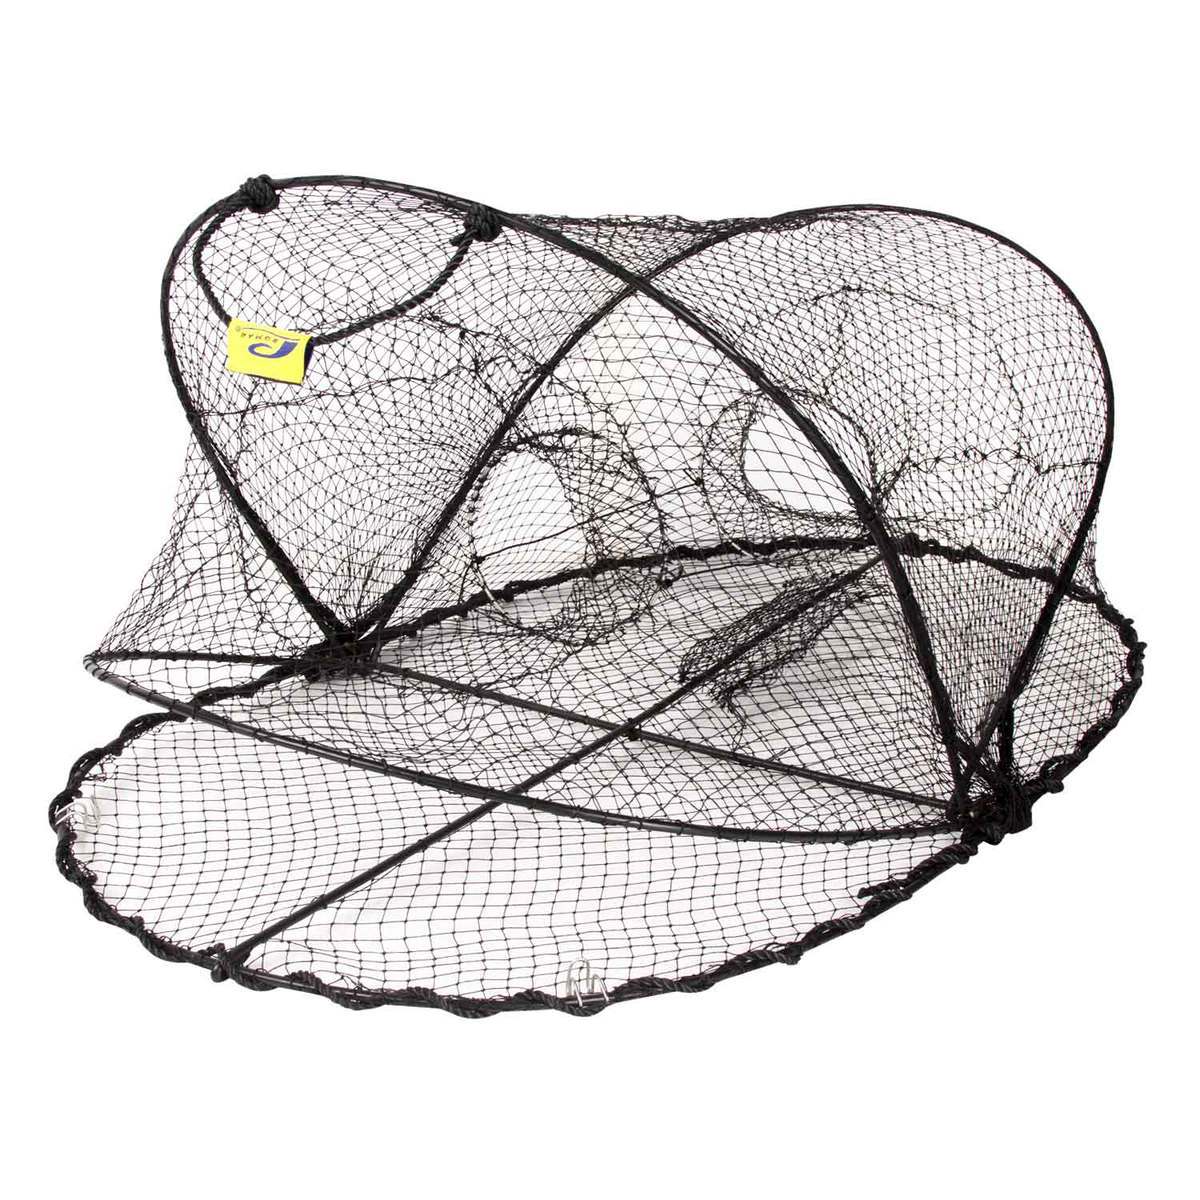 Promar Nets Collapsible Multipurpose Trap - Black 32in x 20in x 12in ...